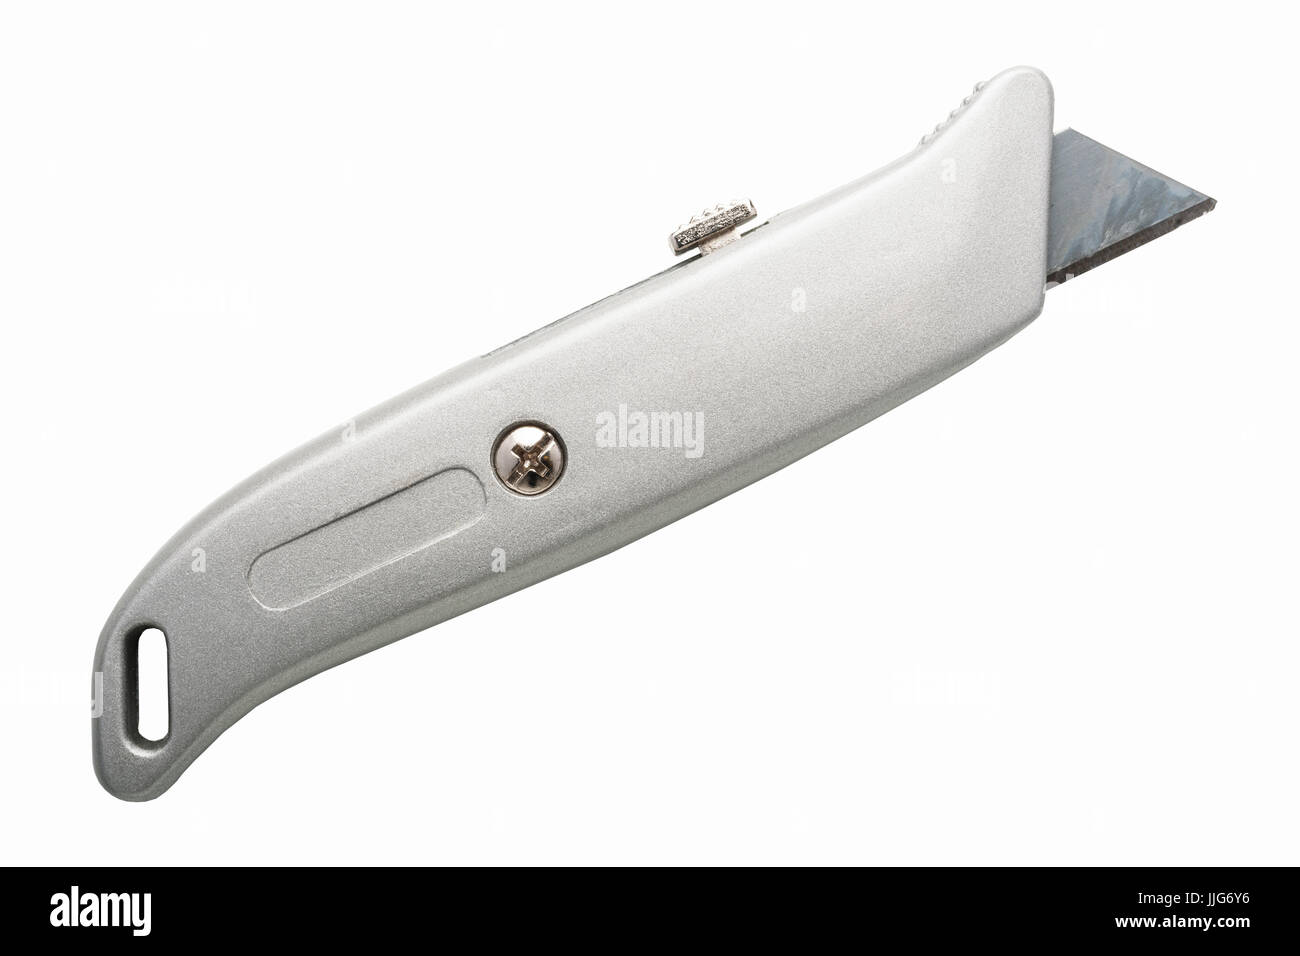 A stanley knife with retractable blade on a white background Stock Photo